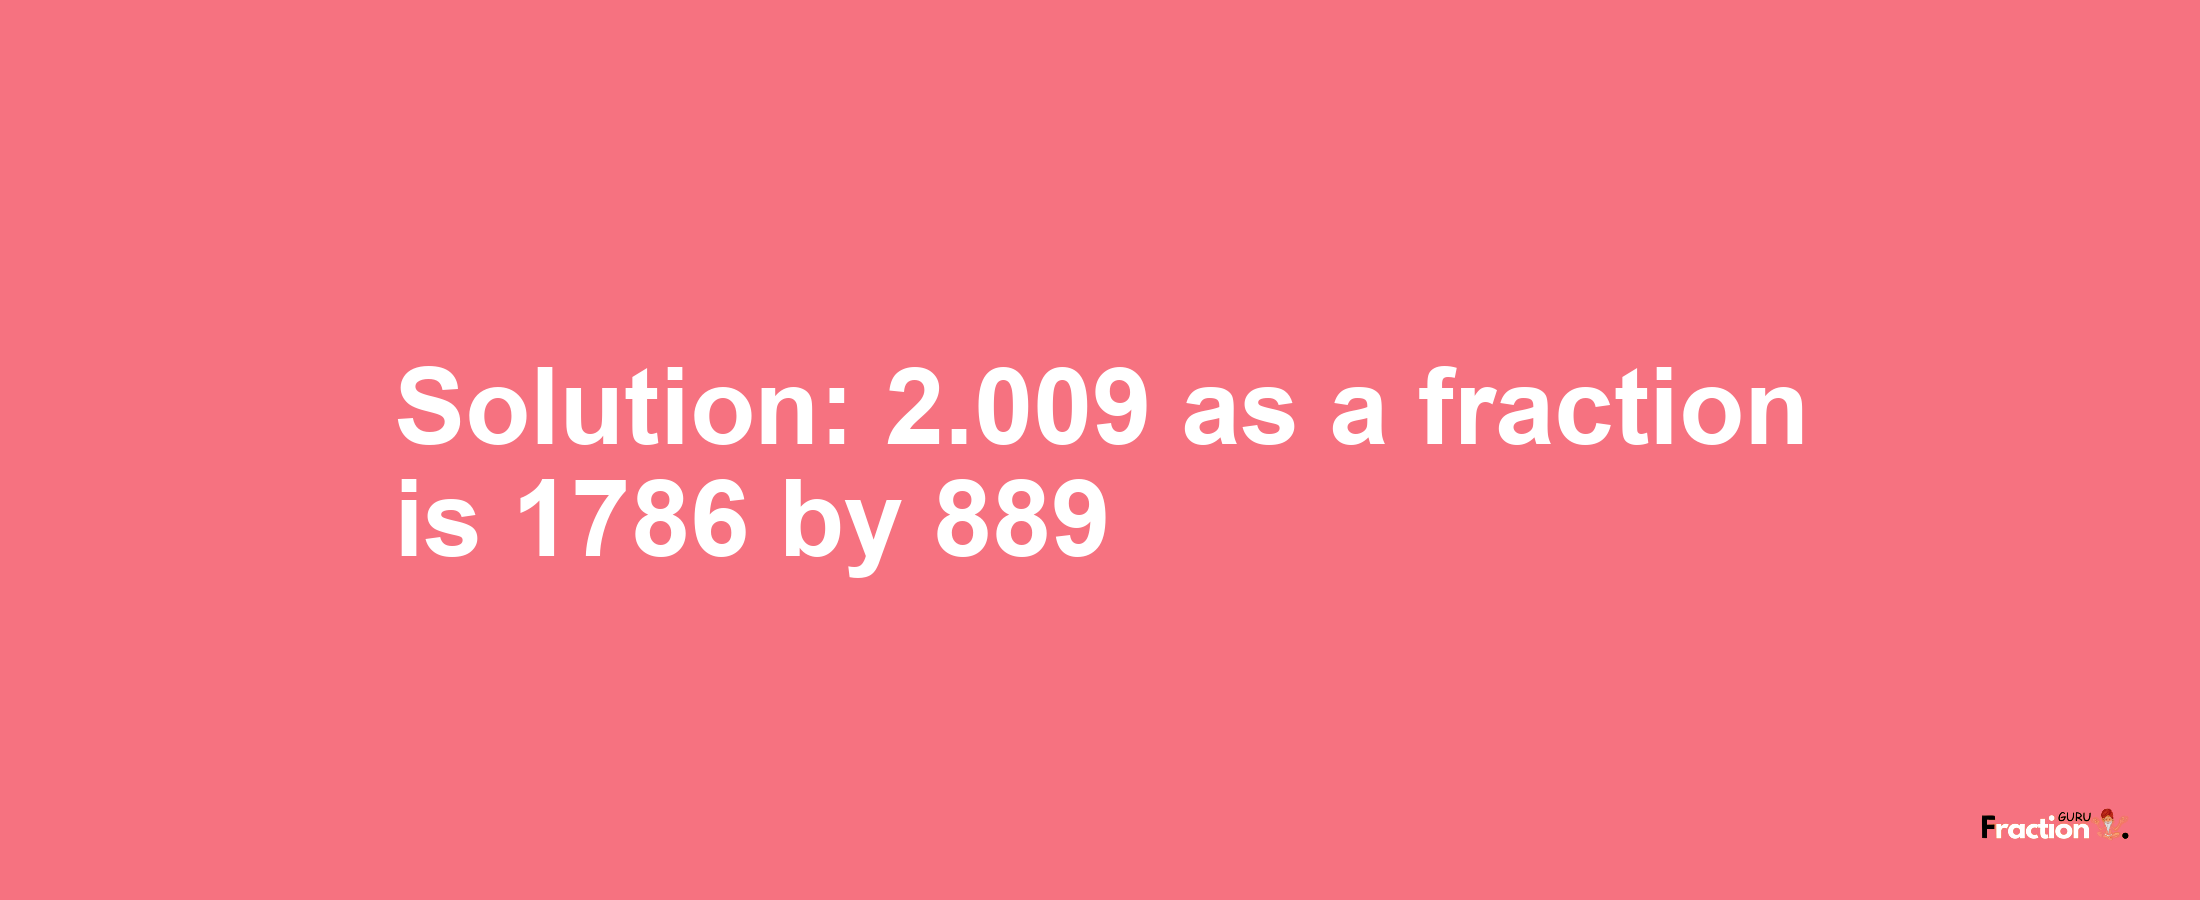 Solution:2.009 as a fraction is 1786/889